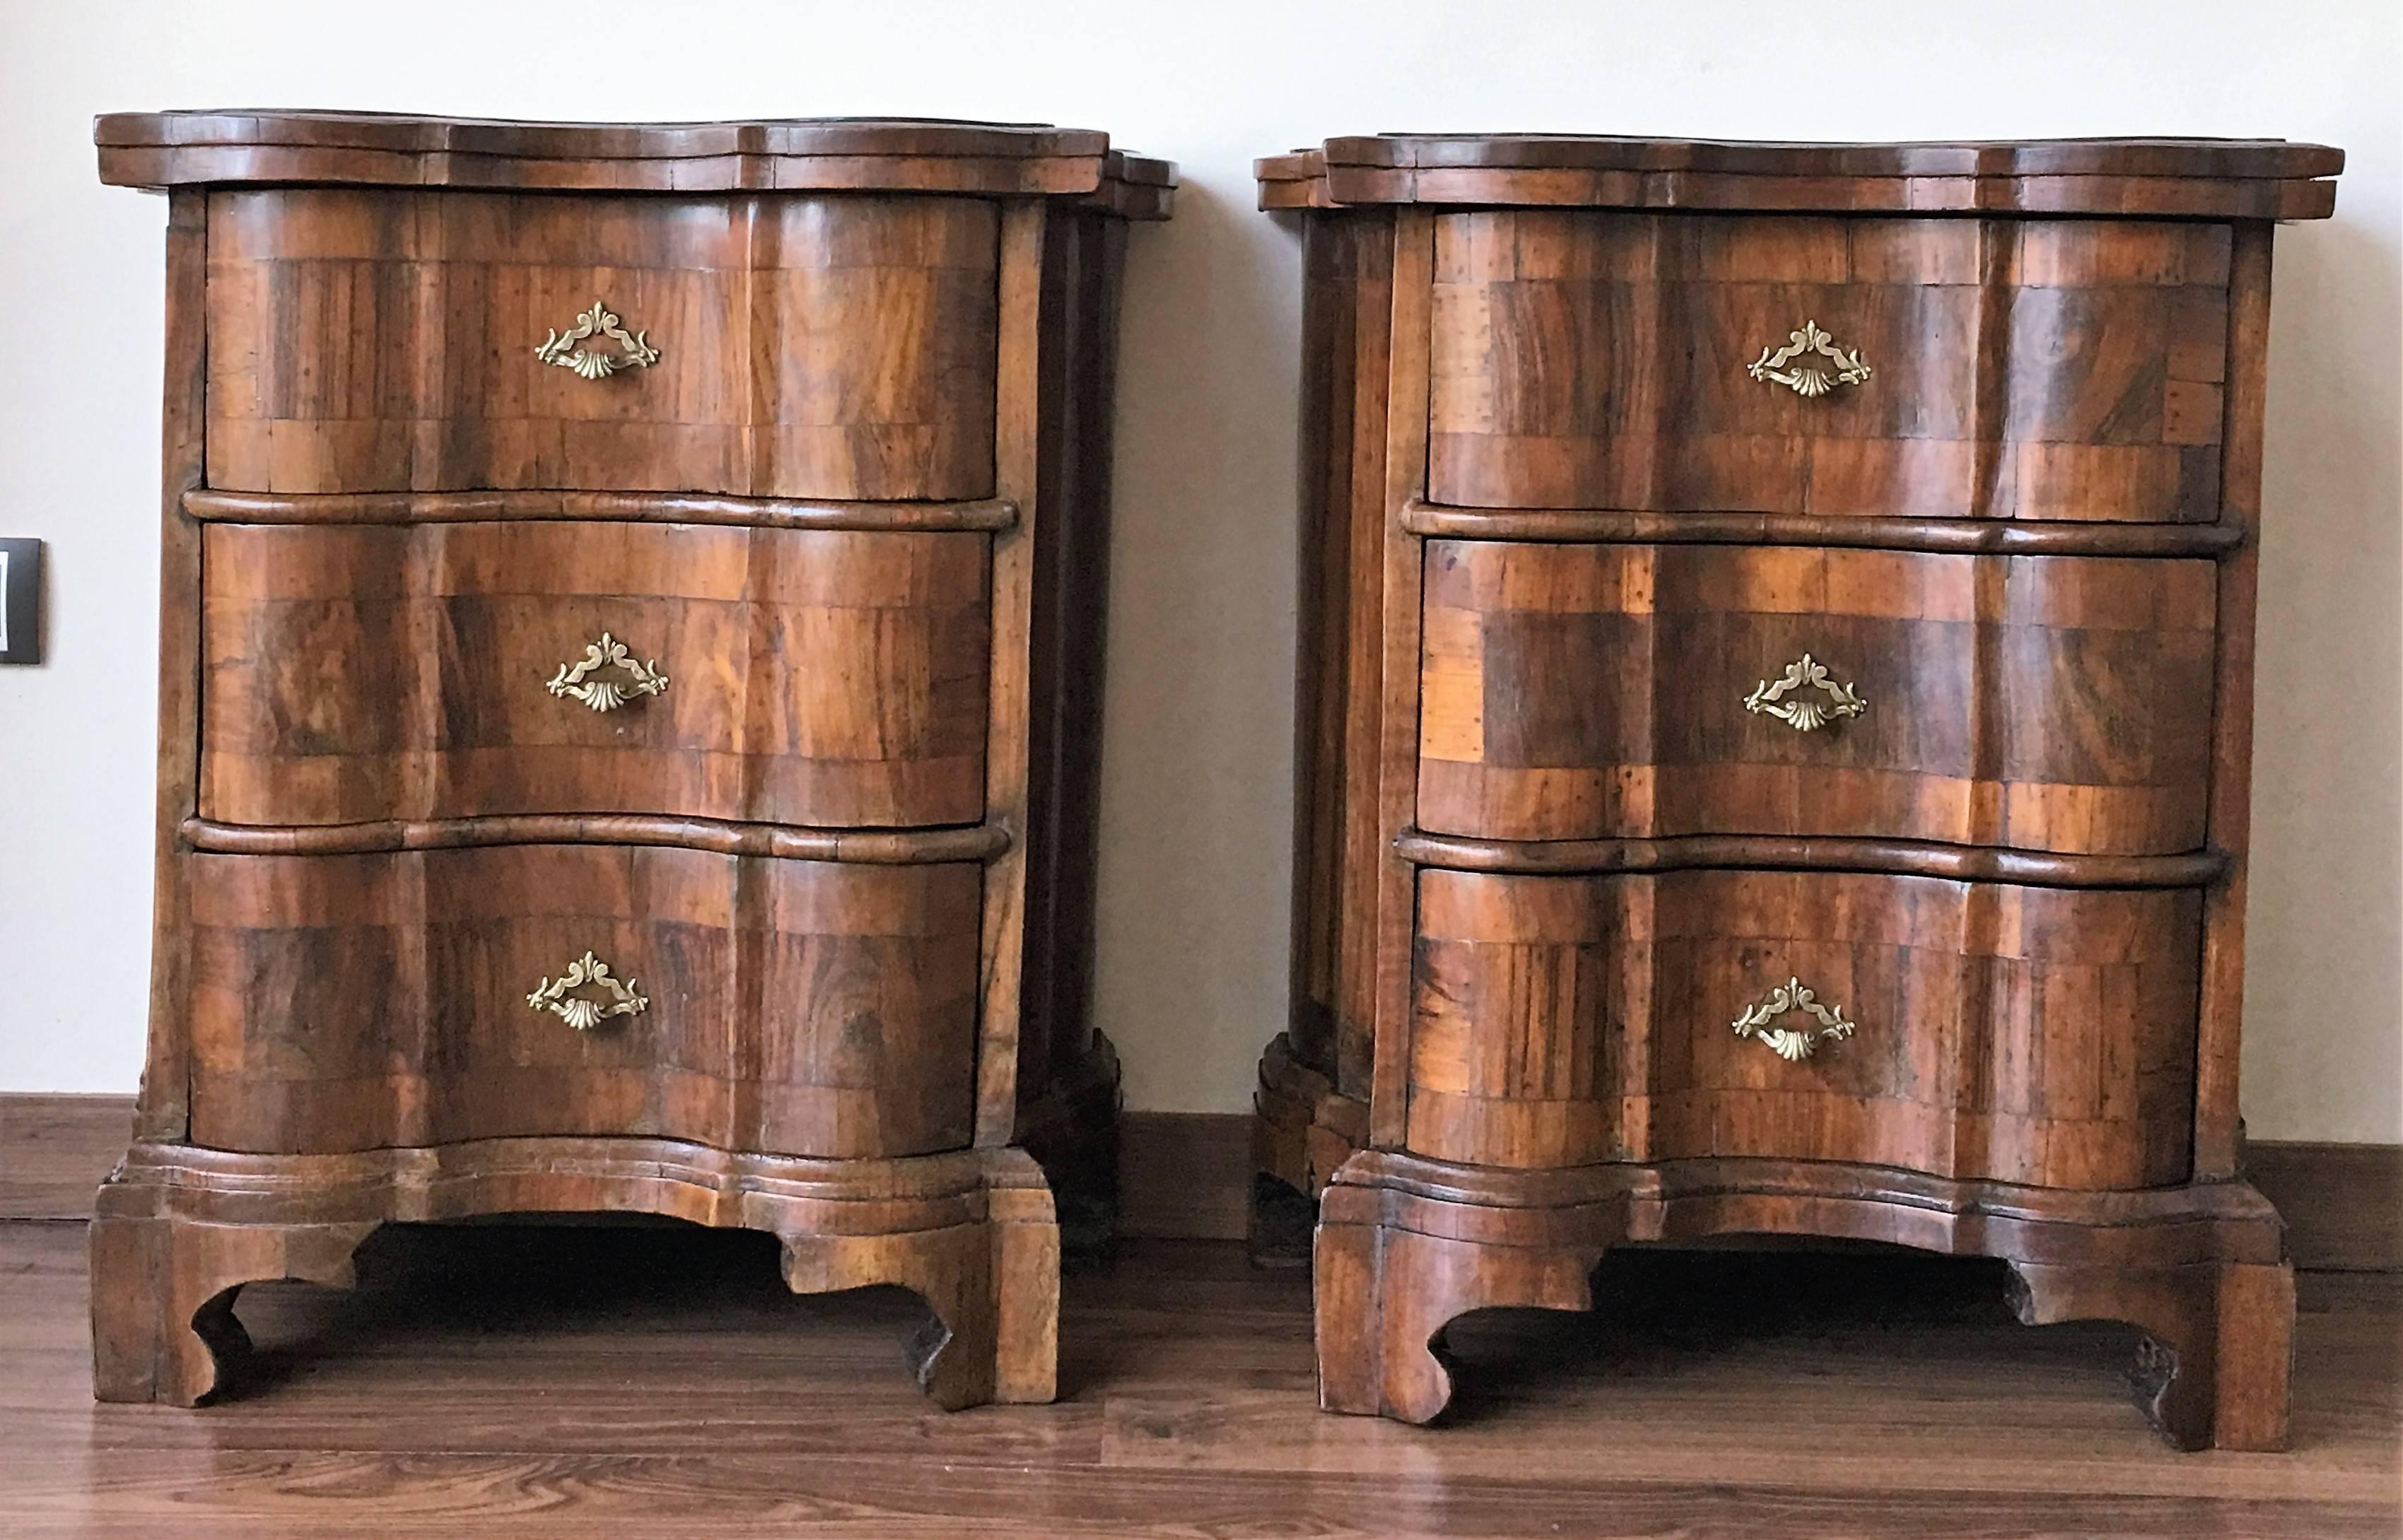 Having butterfly form tops and drawers with rounded corners and molded edges above conforming cases housing three drawers, the drawers intricately veneered with various tones of burl walnut and cherrywood, retaining antique hardware, having shaped